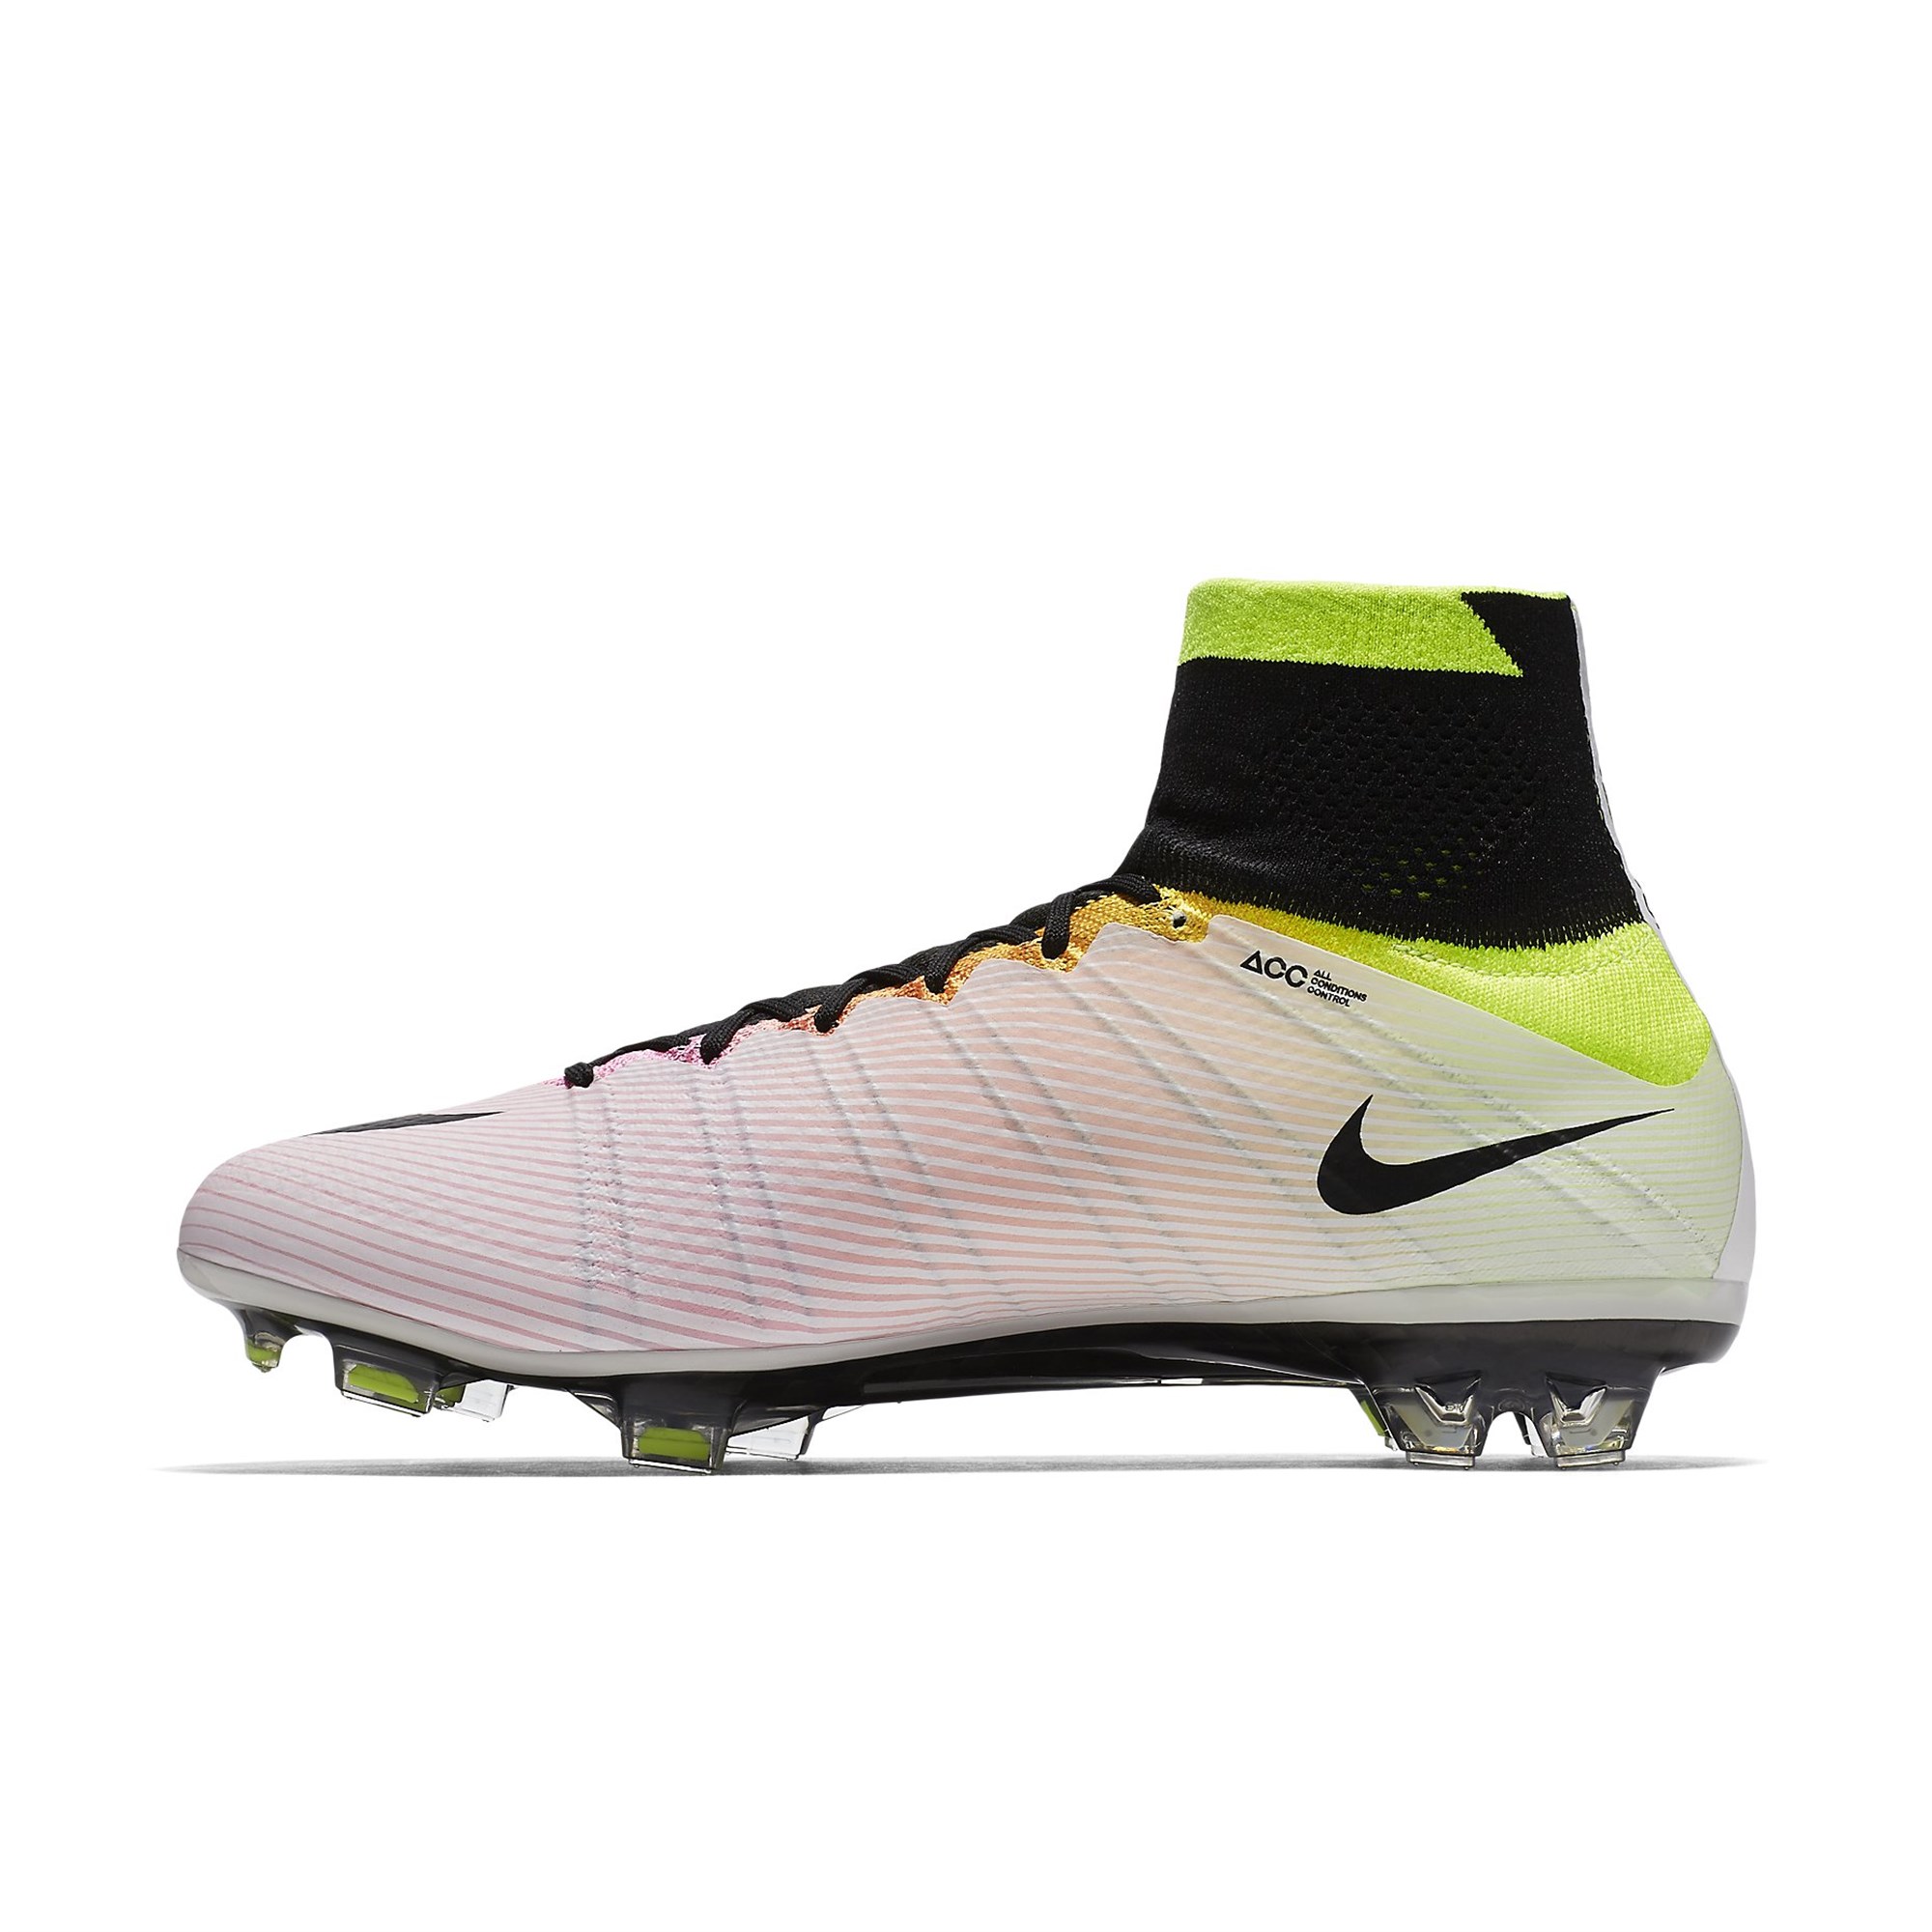 Nike Mercurial Superfly V DF FG Firm Ground Soccer Cleats